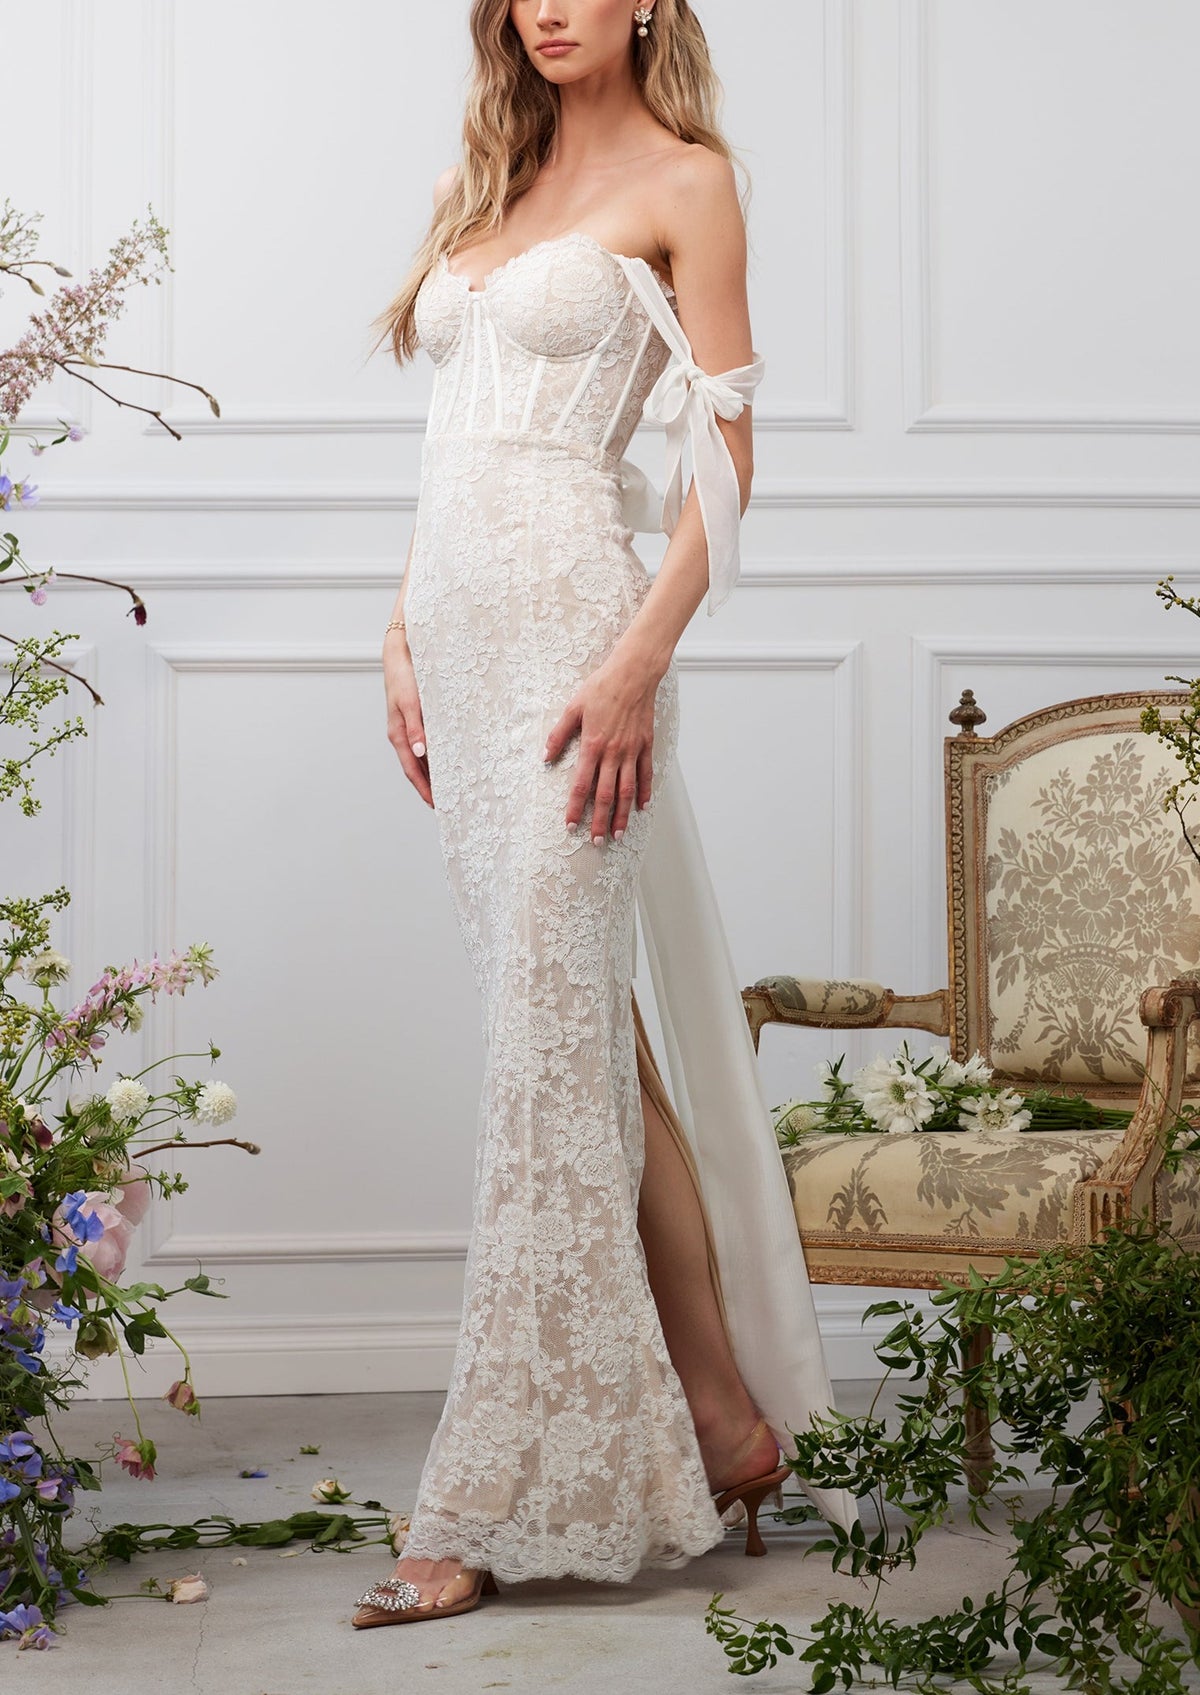 The Romanza Dress in White Chantilly Lace